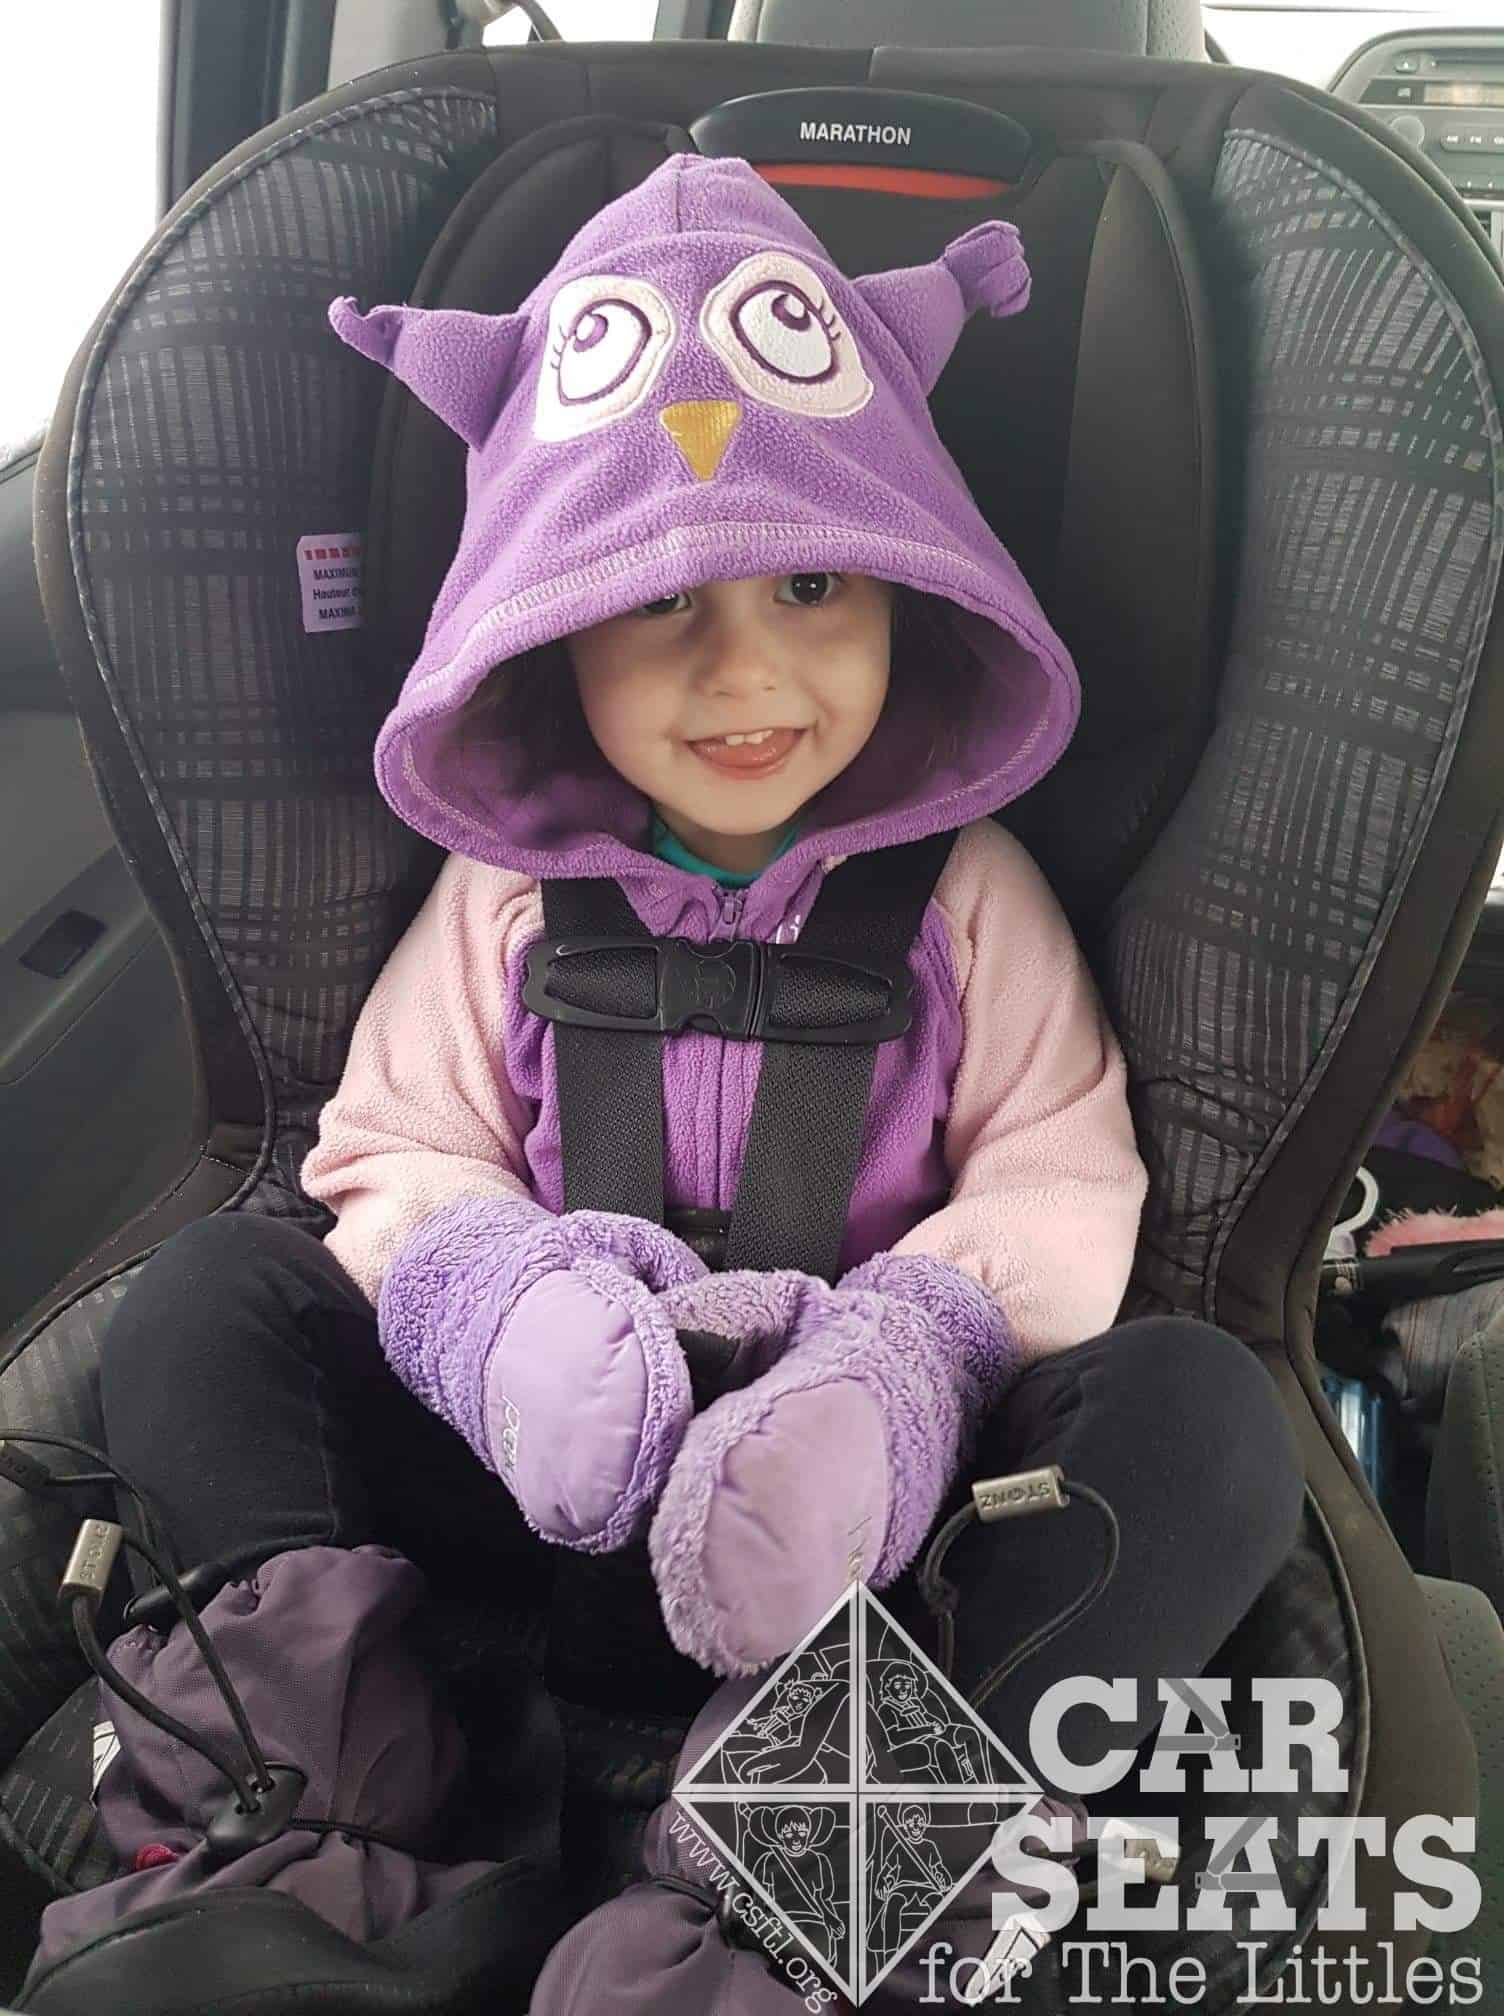 Buckle Me Coats Review - Safe to Wear in Car Seats!